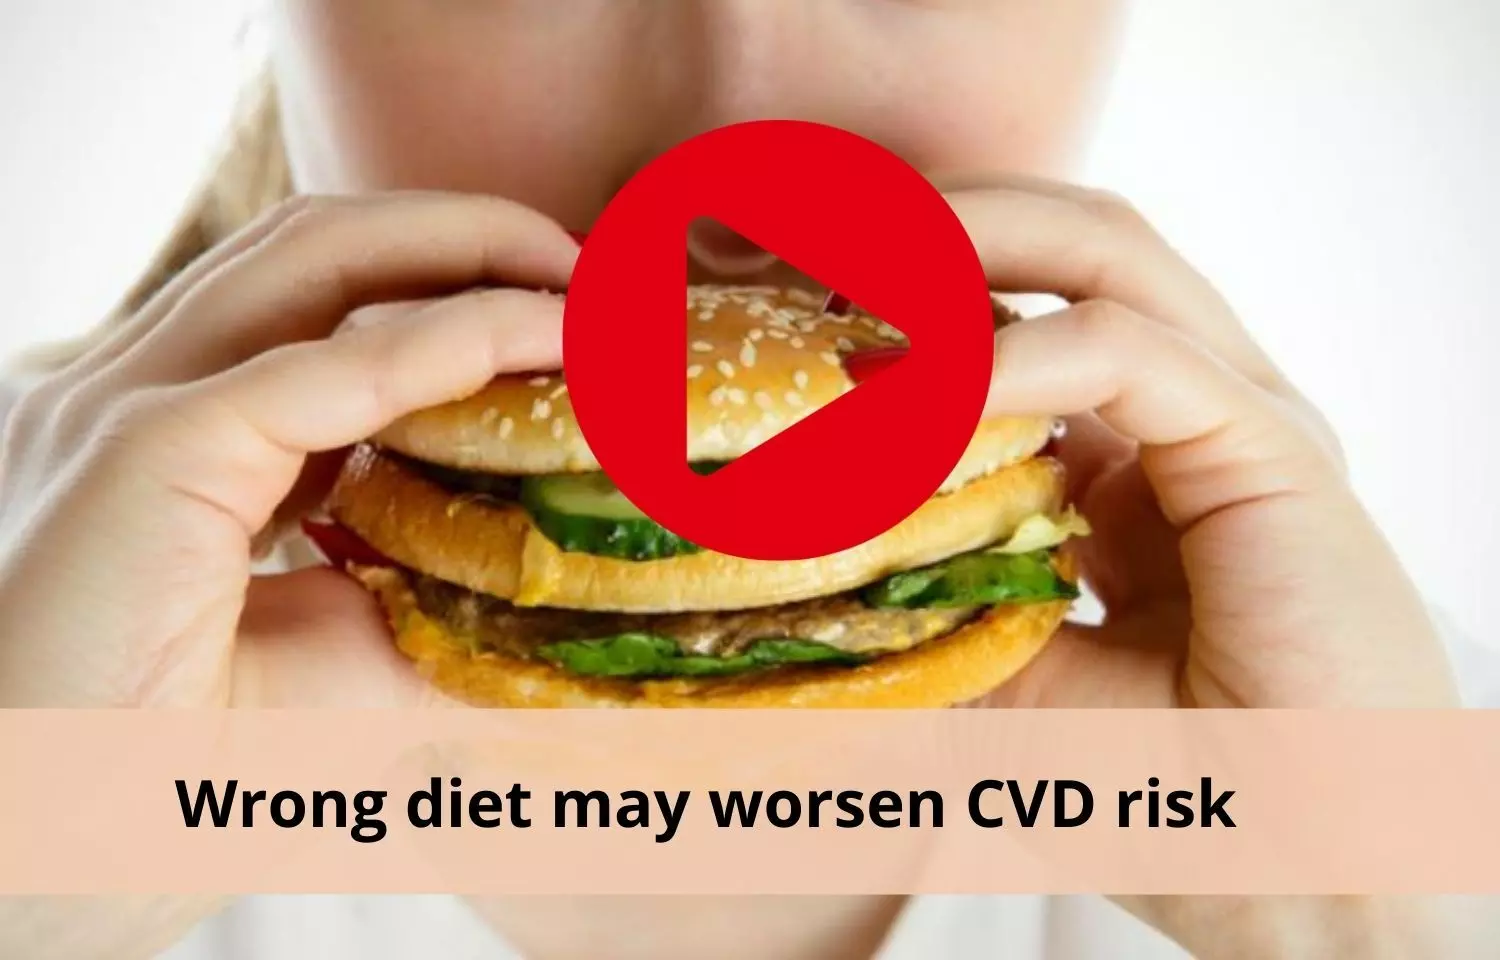 Study links Wrong diet to worse CVD risk